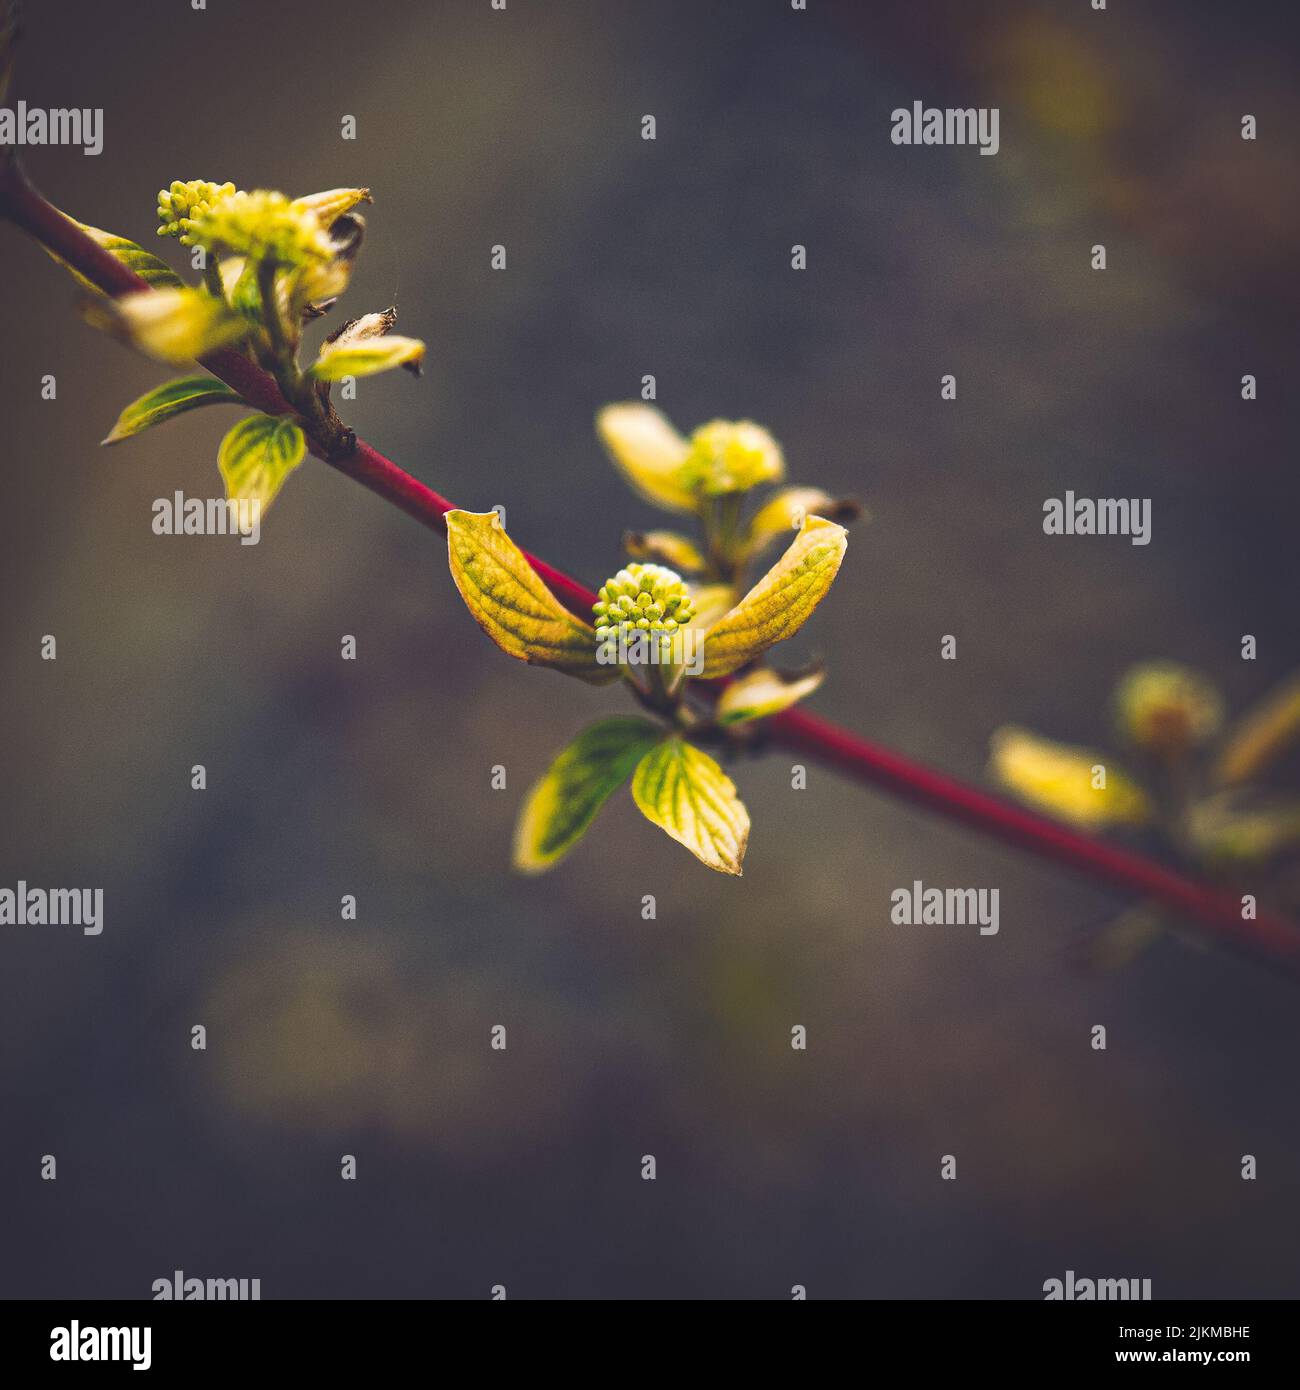 A closeup shot of flower buds on a branch Stock Photo